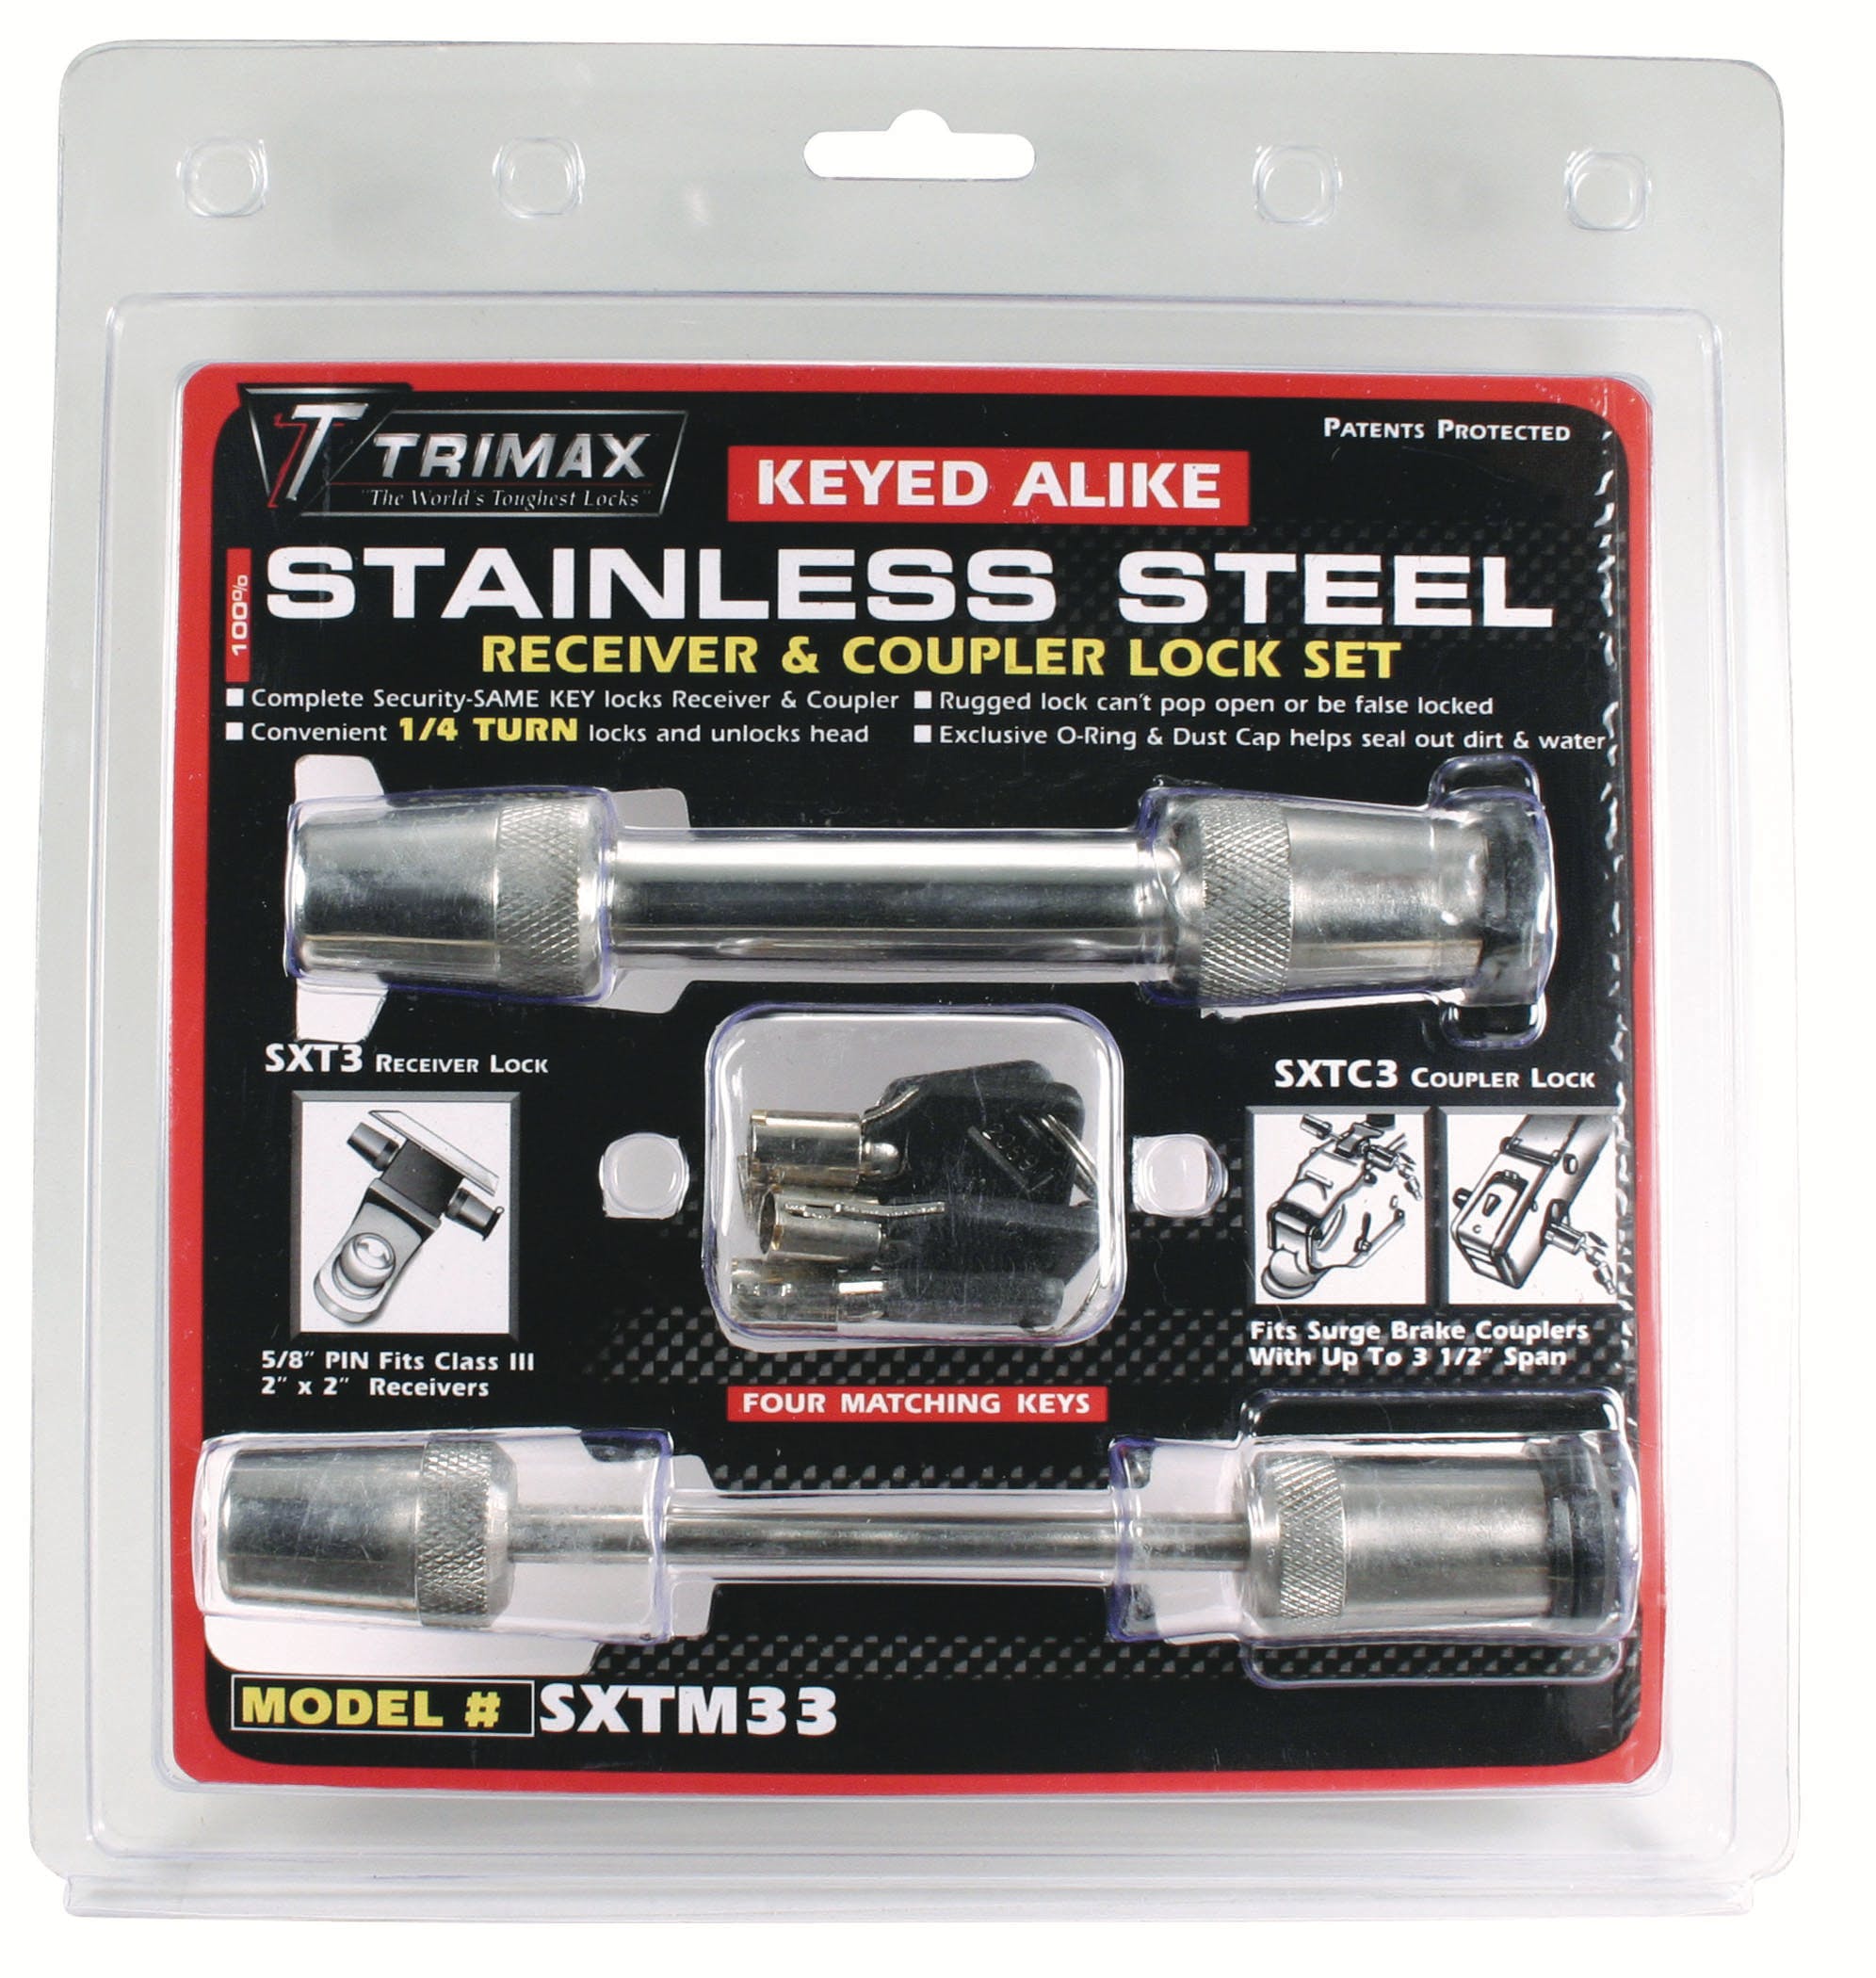 TRIMAX SXTM33 Stainless Steel 3-1/2 inch and 5/8 inch Kit